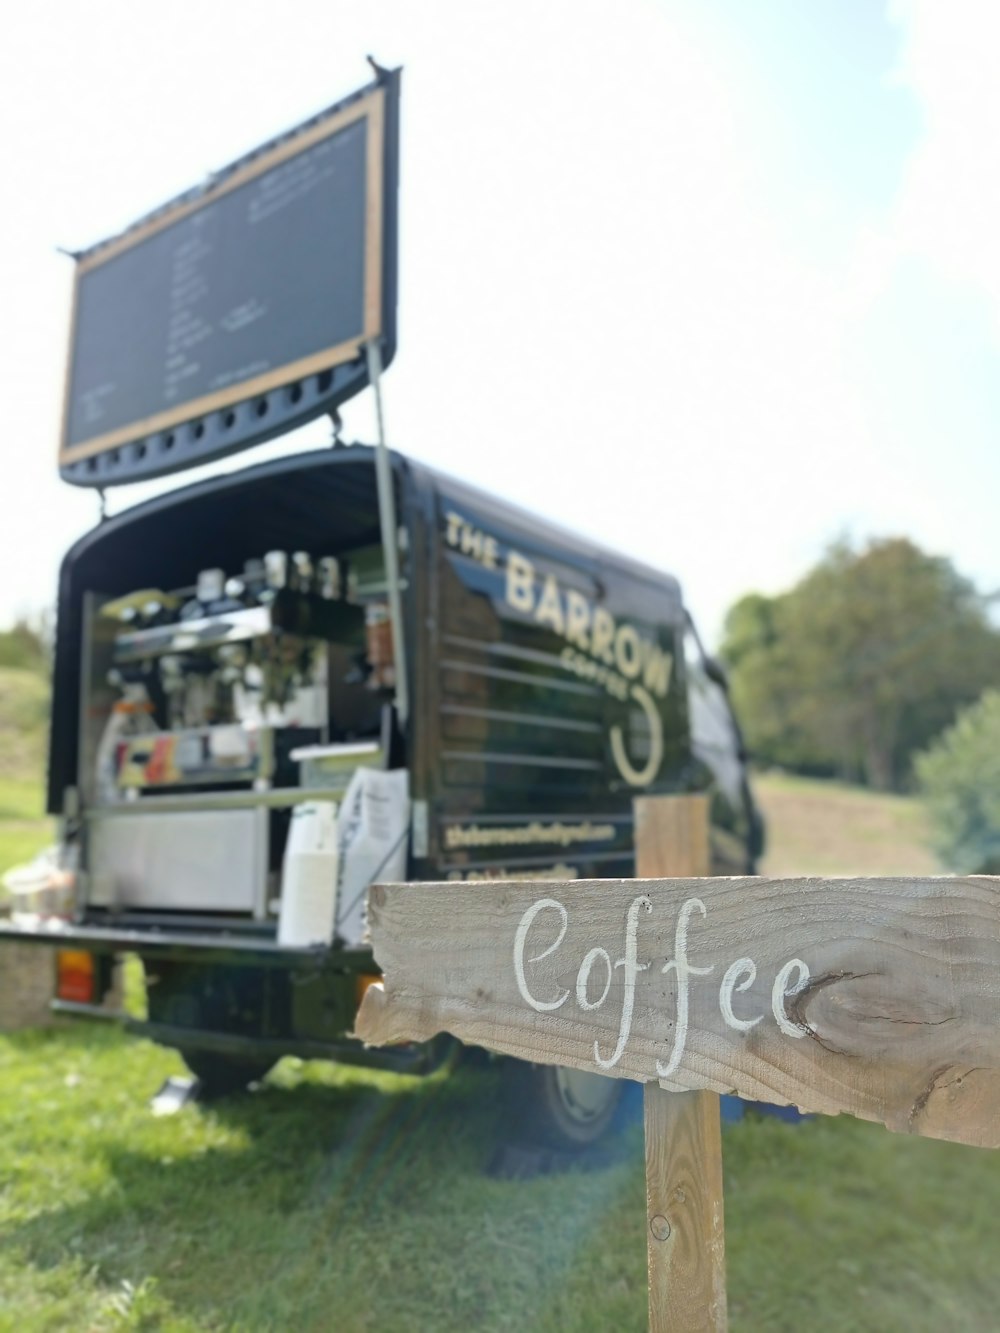 Hero image for supplier The Barrow Coffee